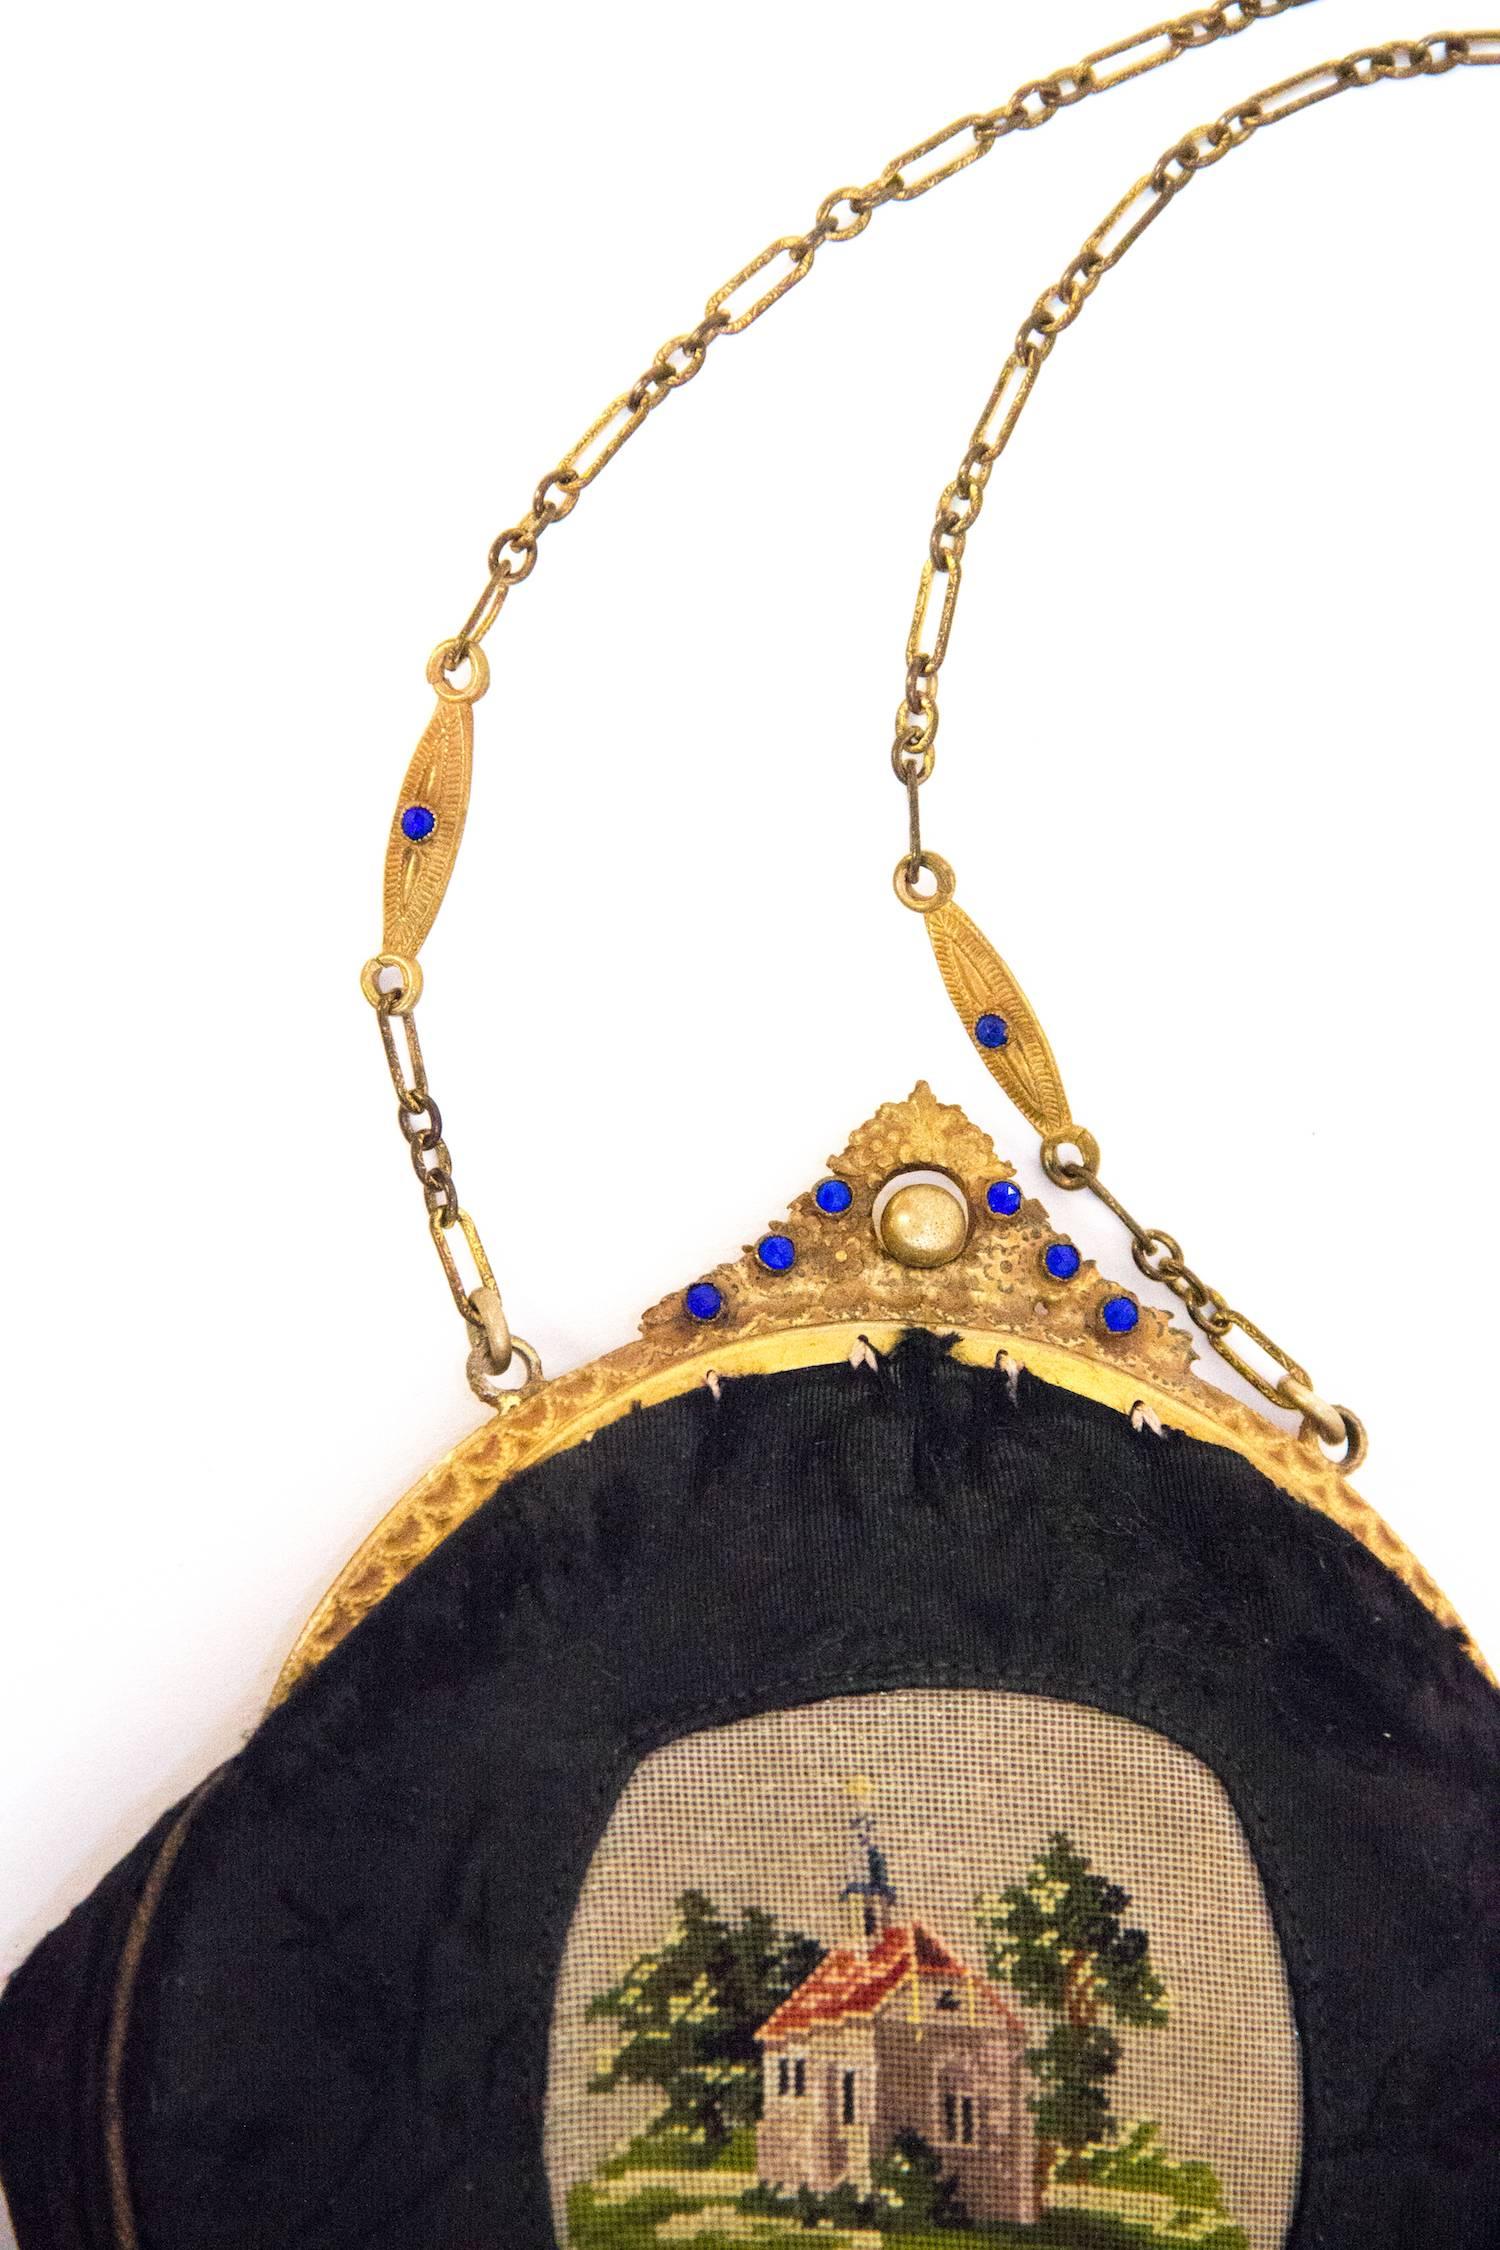 Edwardian black jacquard pouch purse with petit point scene of a house and trees. Gold toned metal frame with blue glass embellishments. Original interior small round mirror that is attached with a small chain. Roughly lined in cream colored cotton.